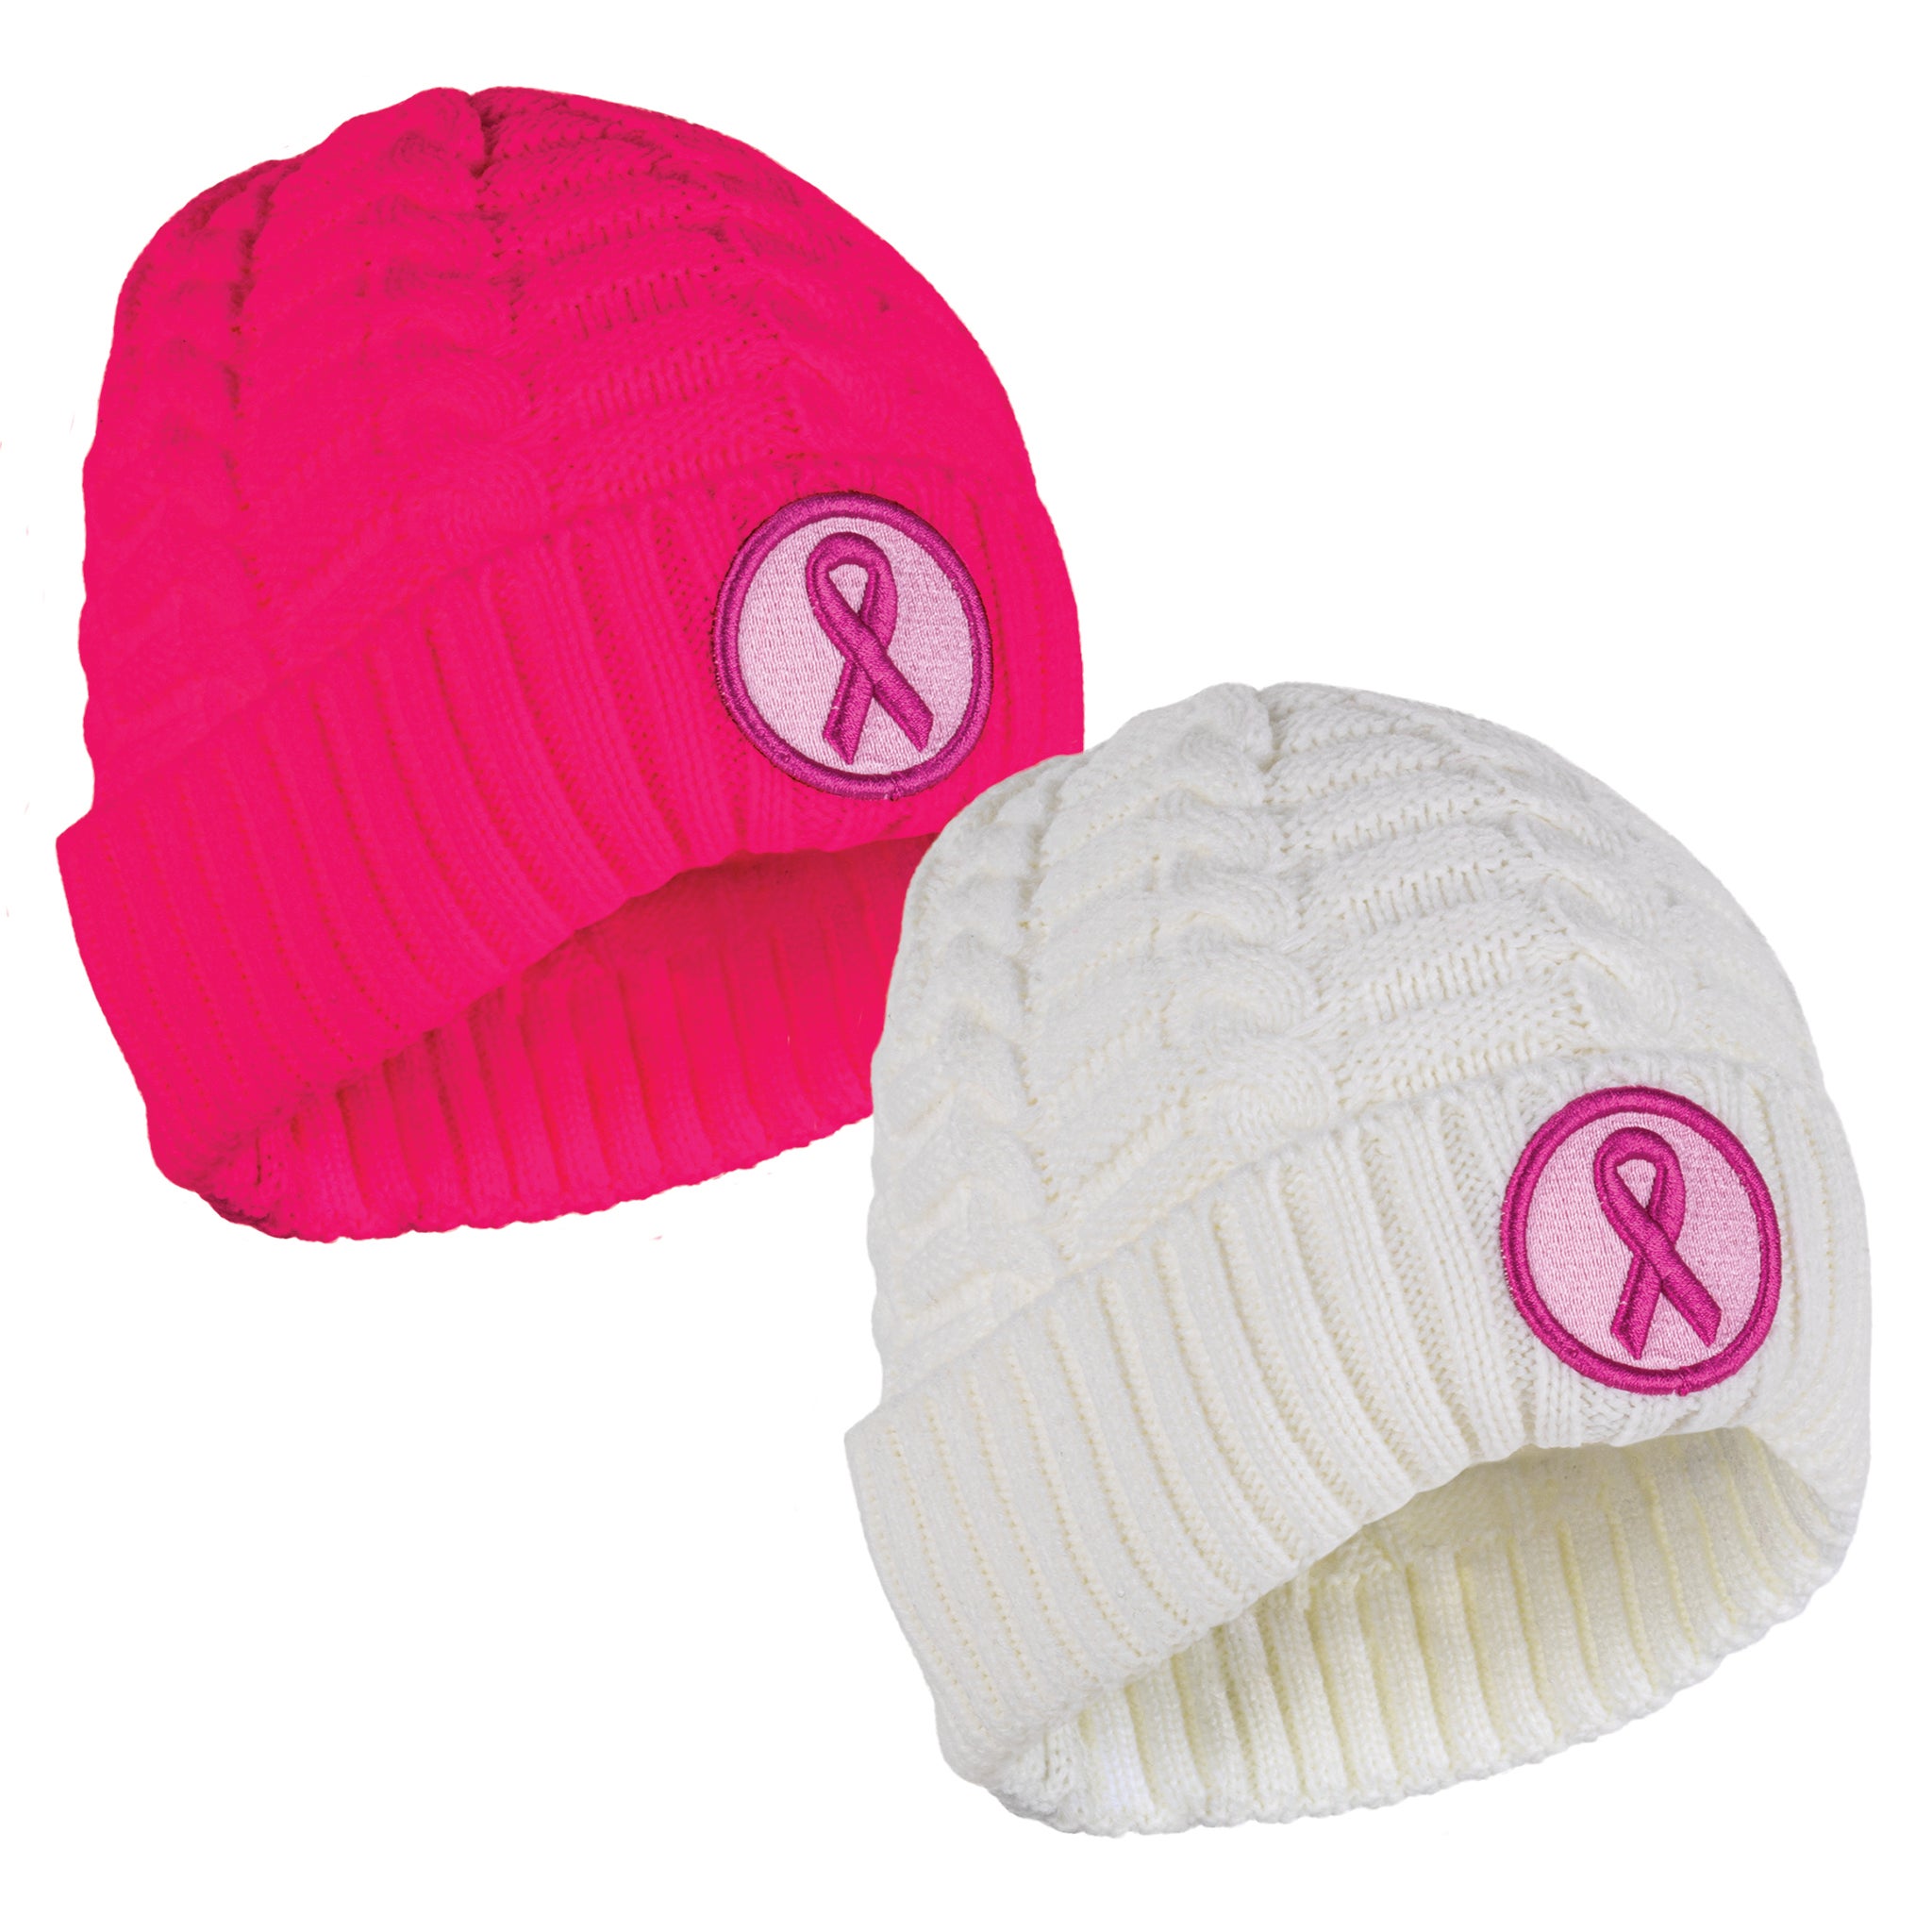 Buy Hats, Beanies & Apparel - Fight Cancer